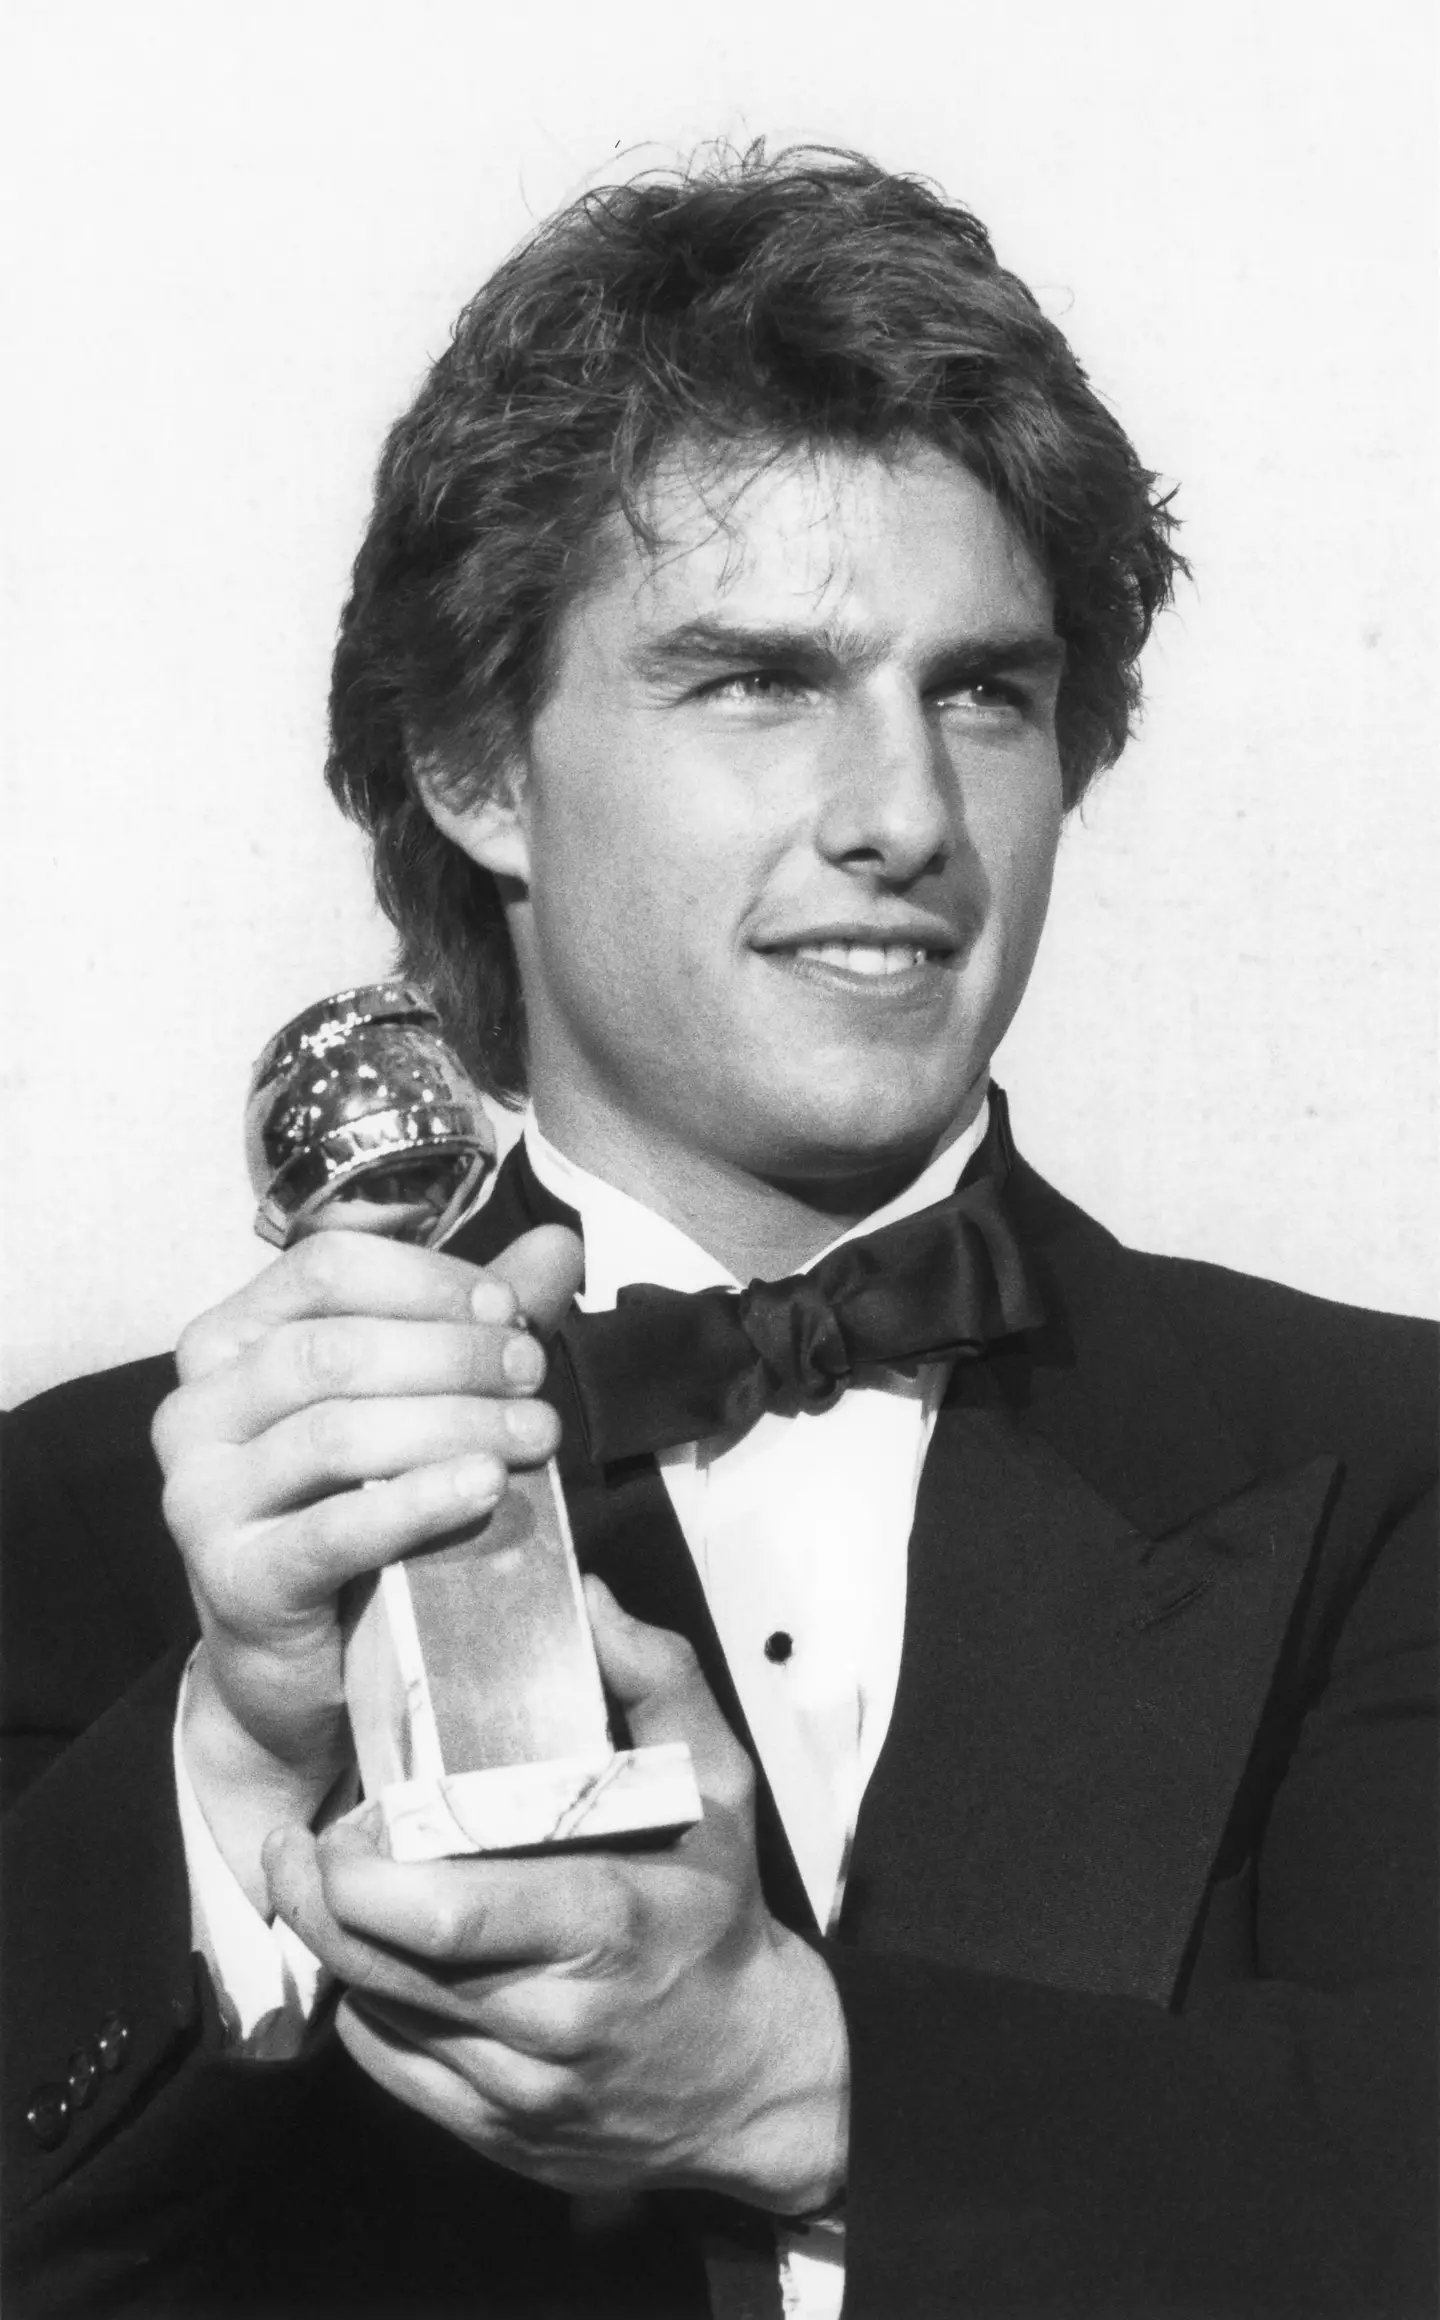 Tom Cruise won his first Golden Globe back in 1990.